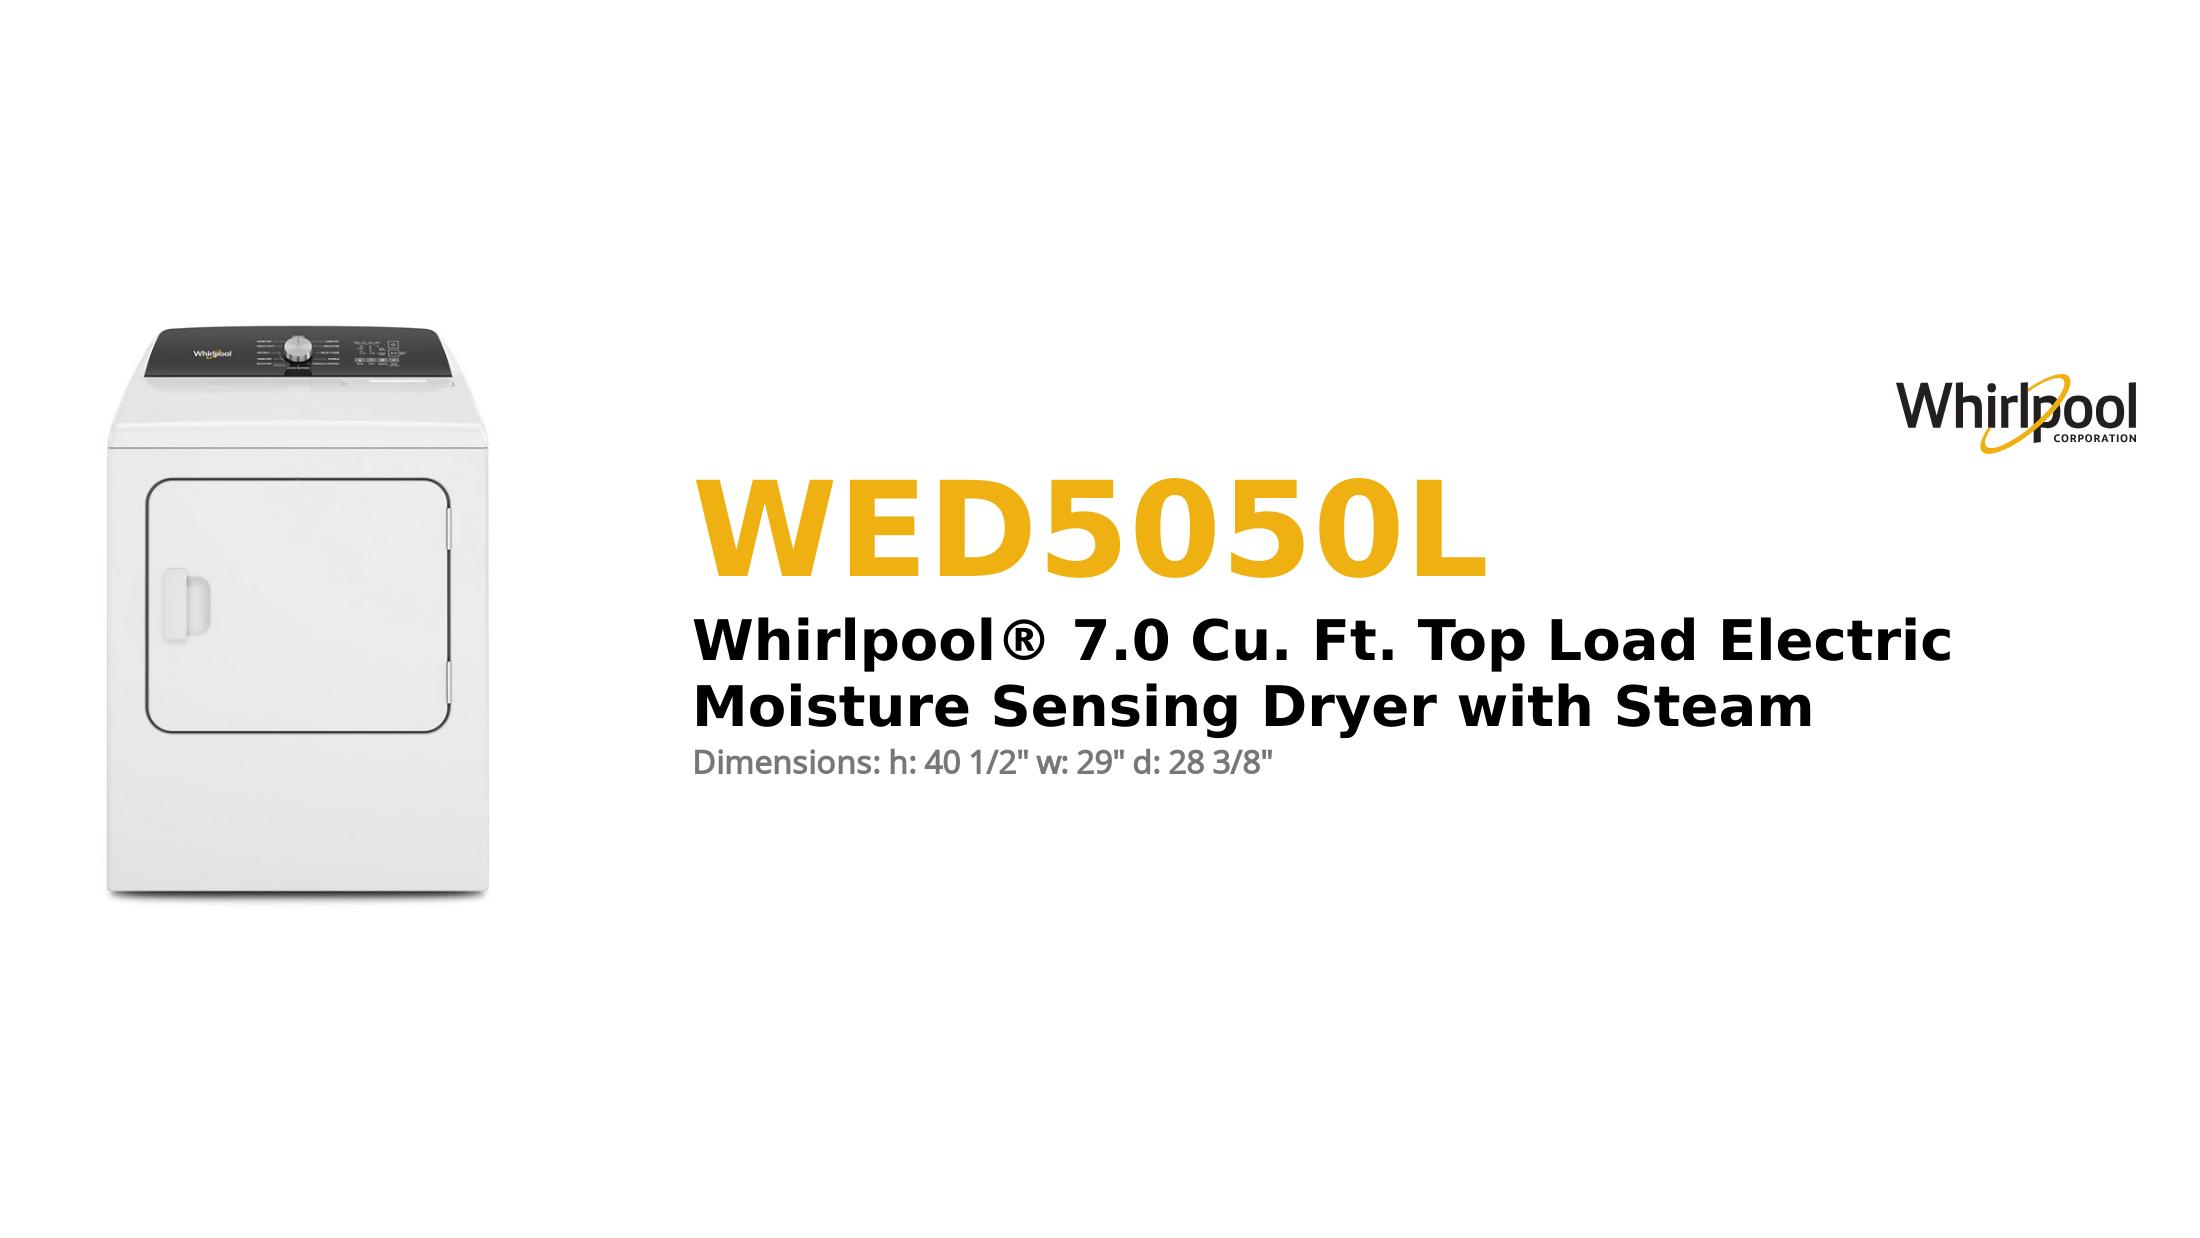 Whirlpool® 7.0 Cu. Ft. Top Load Electric Moisture Sensing Dryer with Steam
 